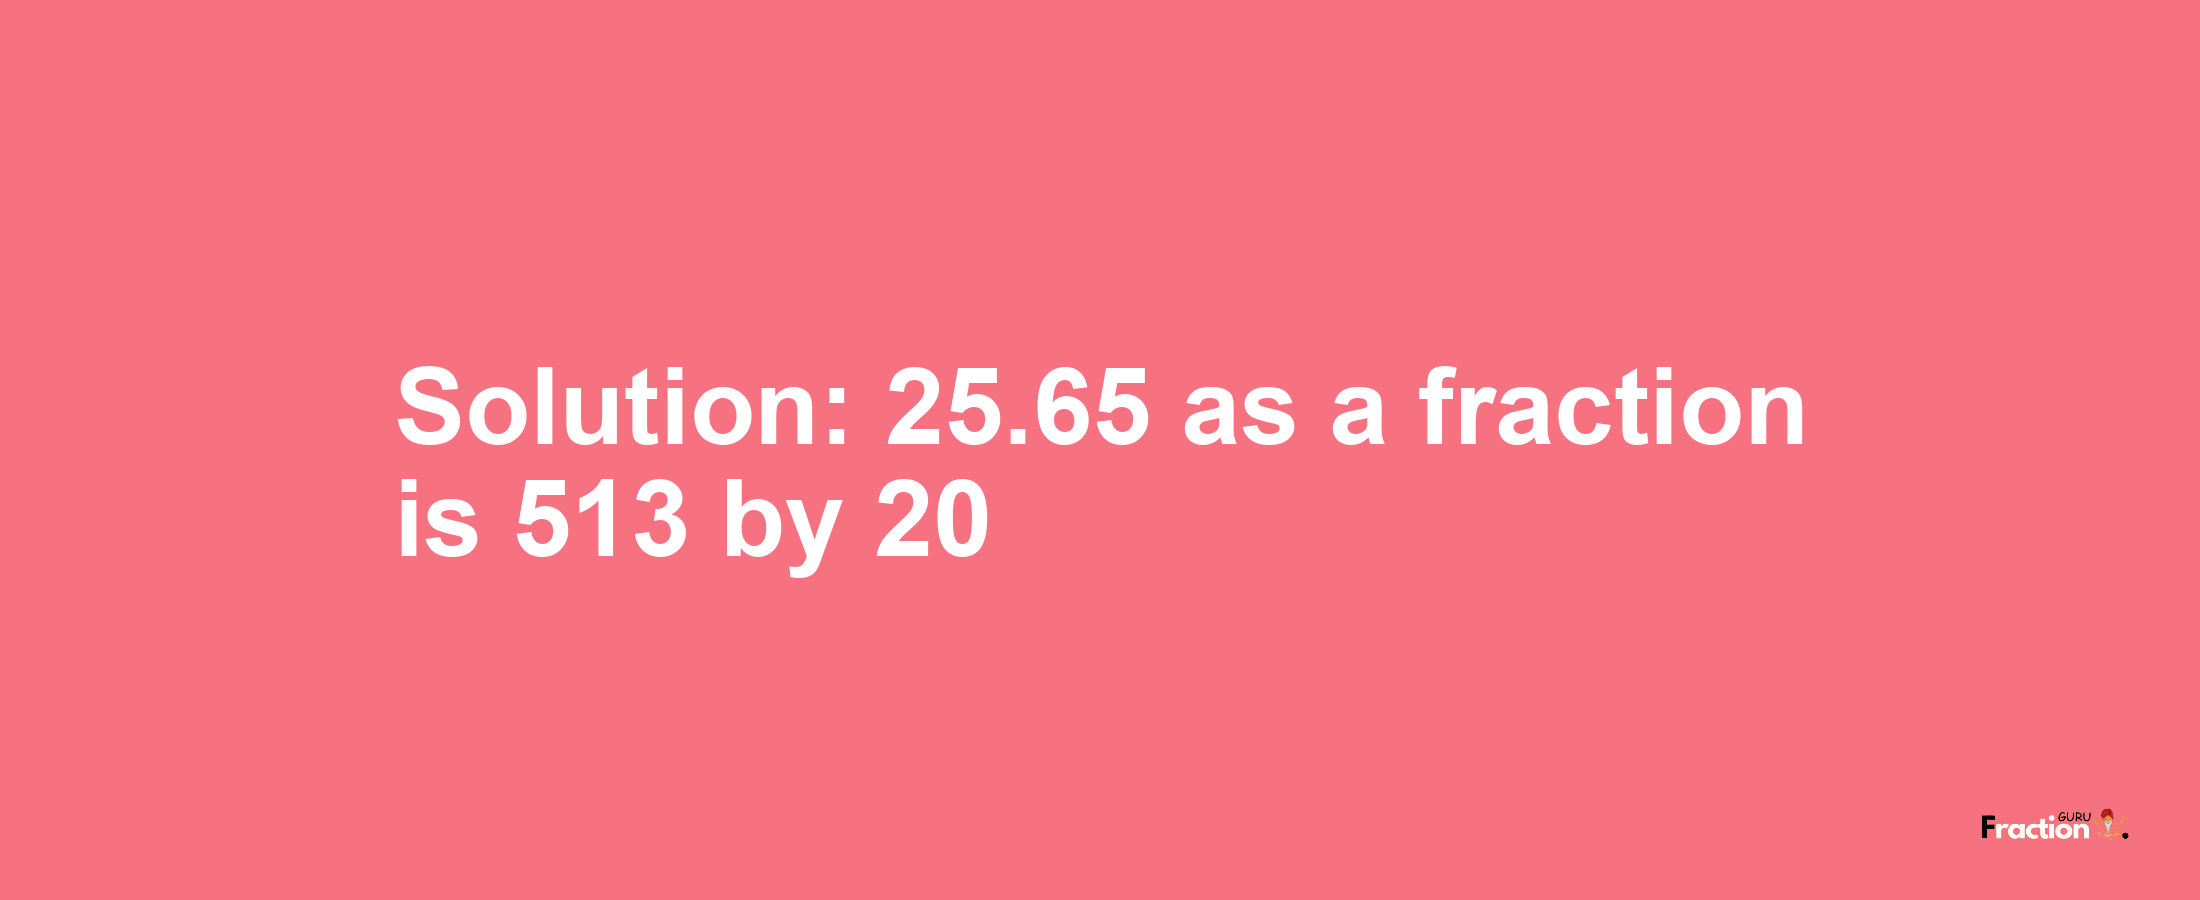 Solution:25.65 as a fraction is 513/20